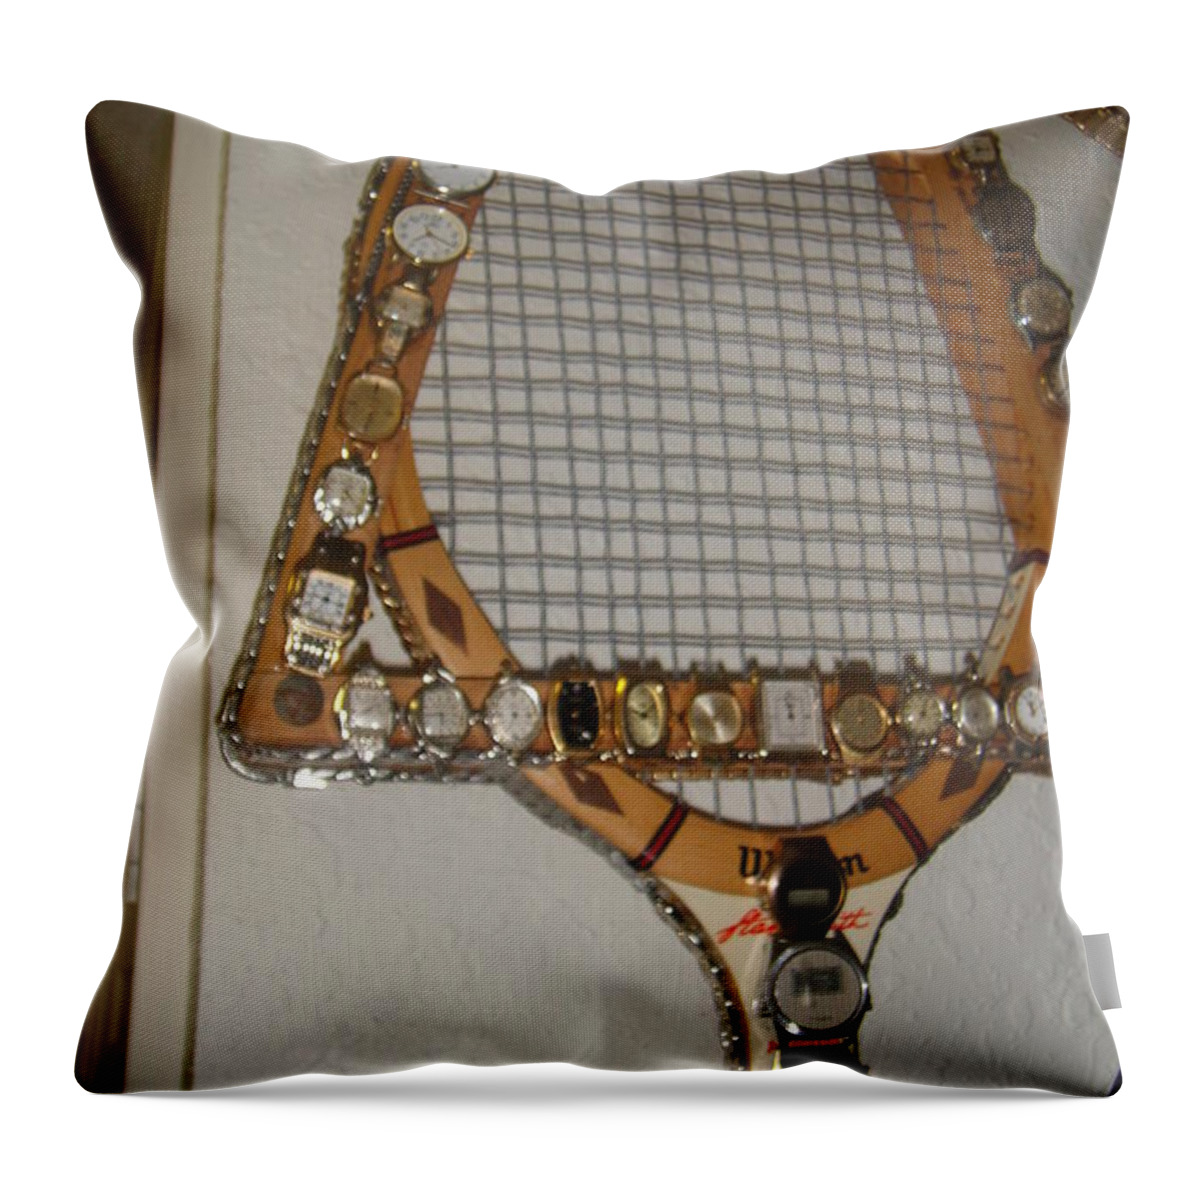 Vintage Tennis Raquet Throw Pillow featuring the mixed media Raquet At Rest by WaLdEmAr BoRrErO